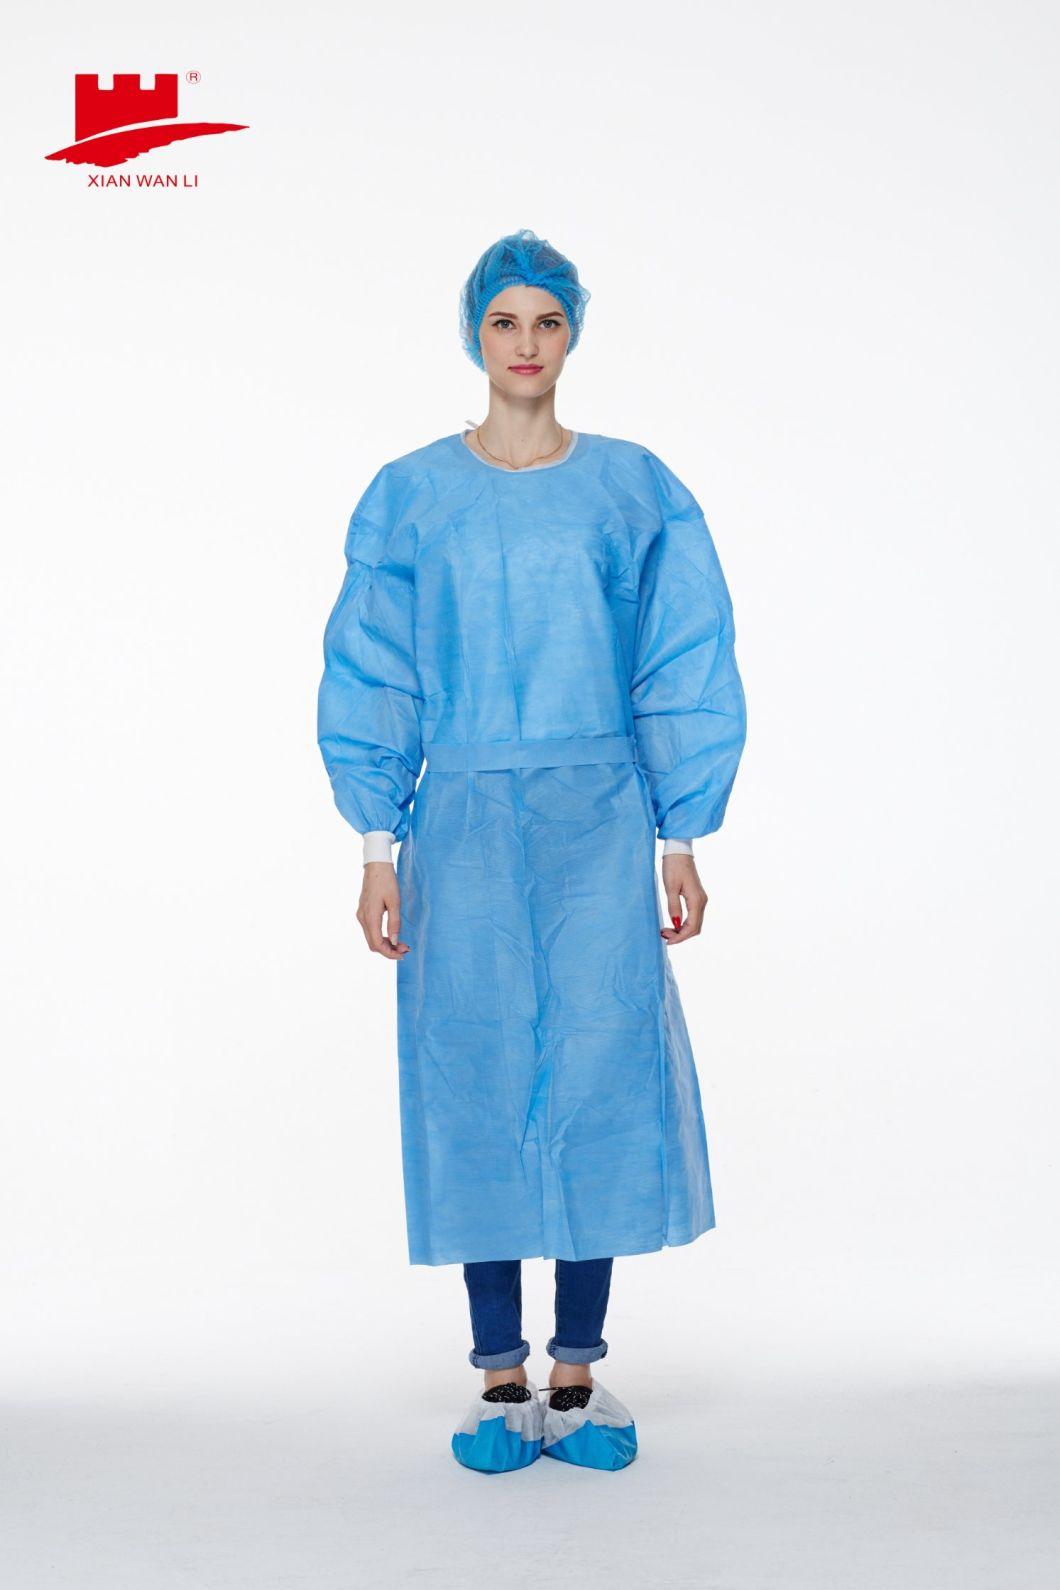 Hospital Disposable Surgical Medical Non Woven Isolation Gown AAMI Level 1/2/3/4